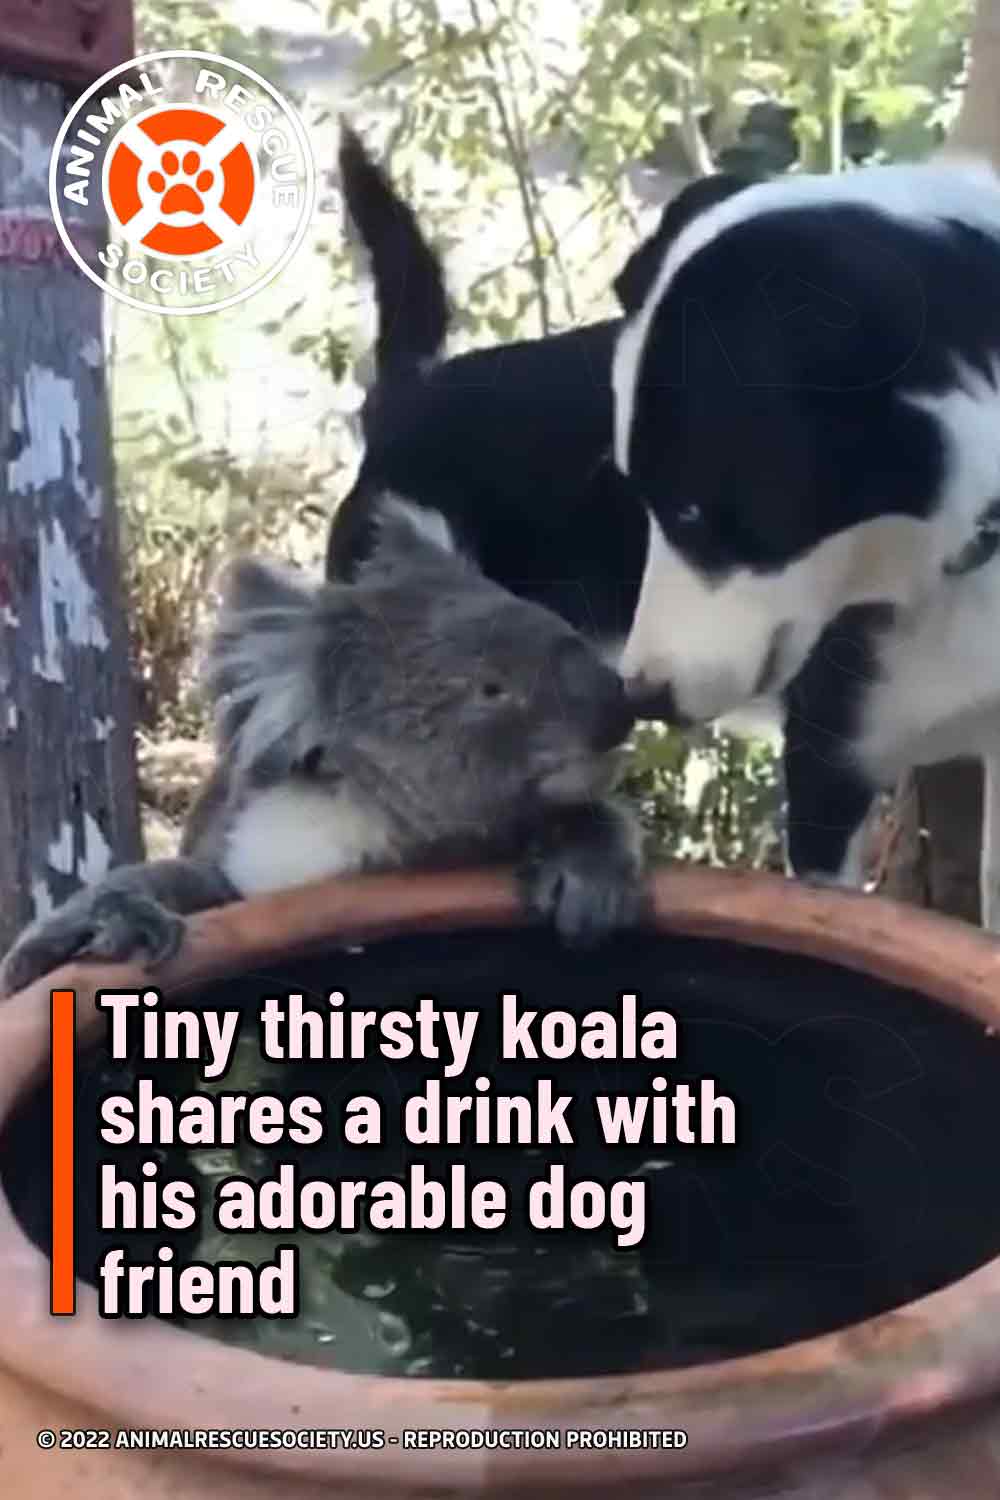 Tiny thirsty koala shares a drink with his adorable dog friend